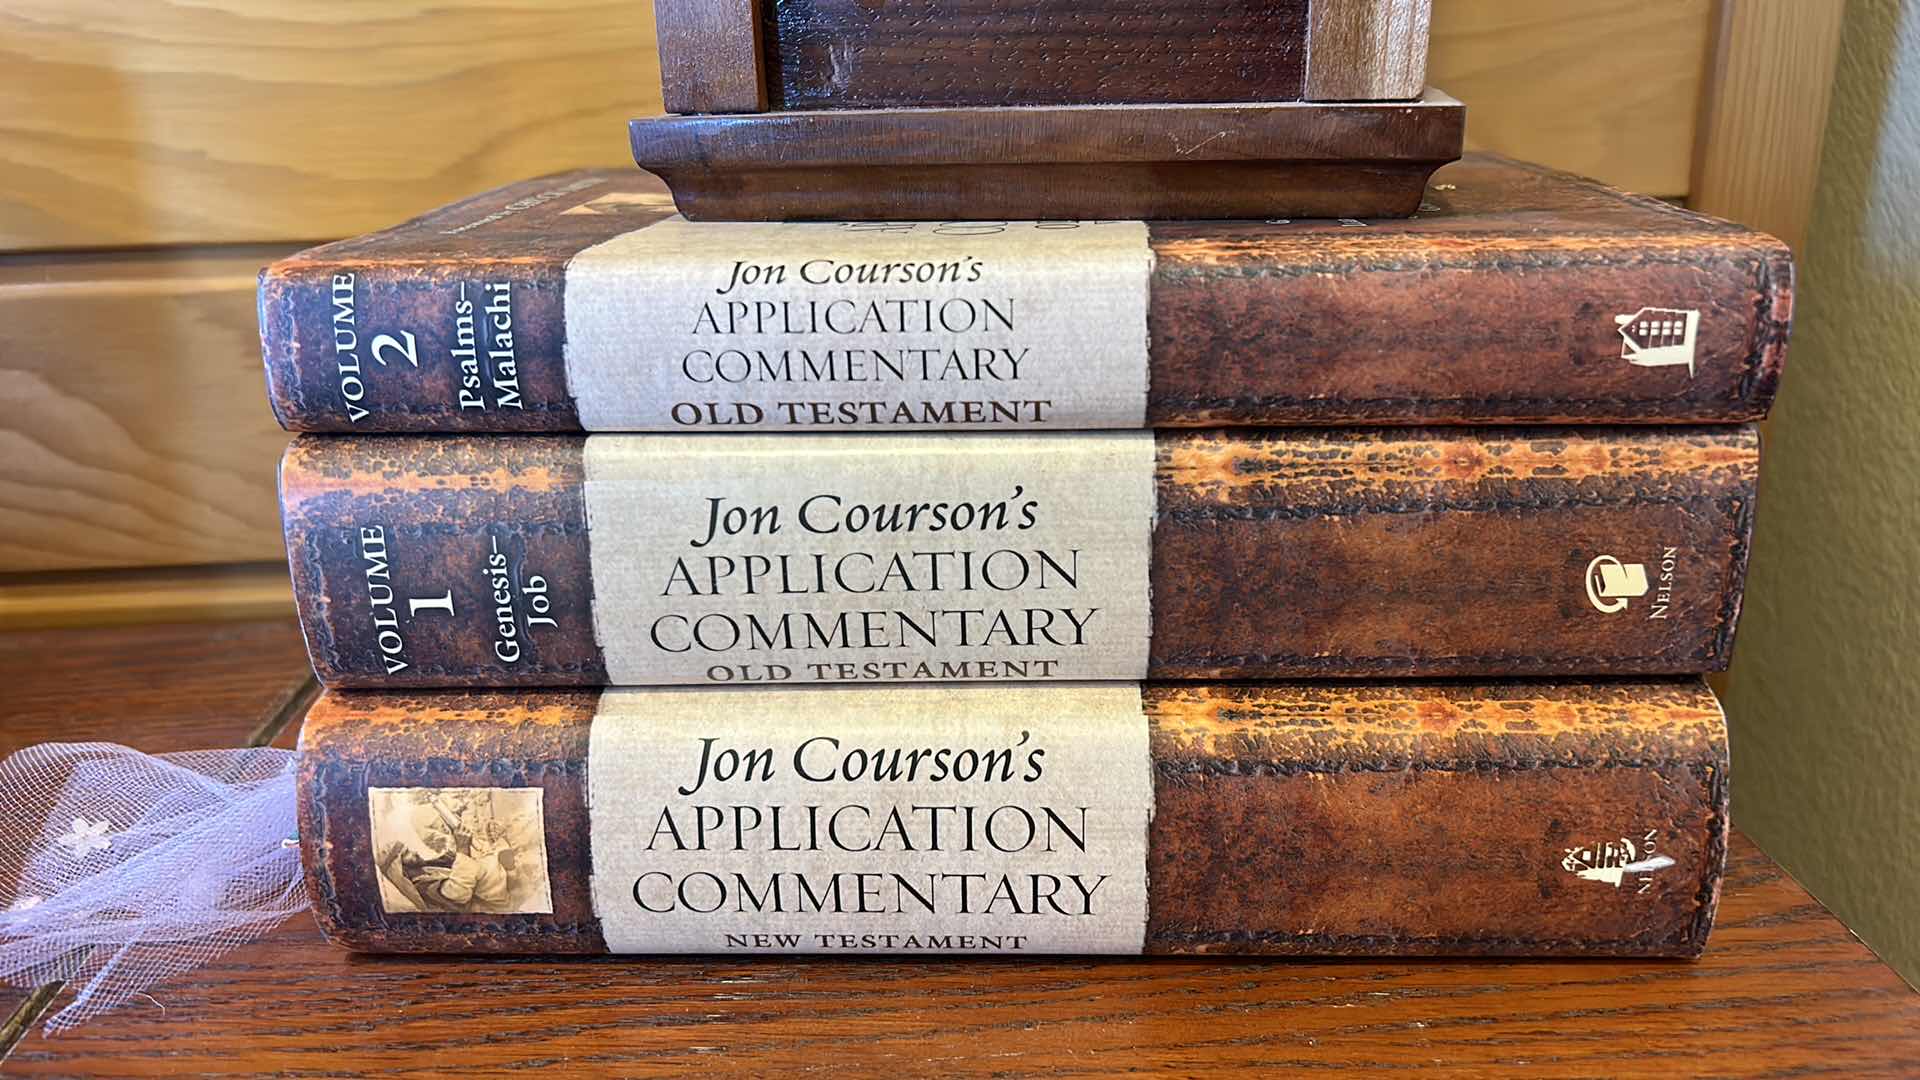 Photo 2 of 3 HARDCOVER BOOKS JOHN COURSON’S APPLICATION COMMENTARY NEW AND OLD TESTAMENT, and CLOCK